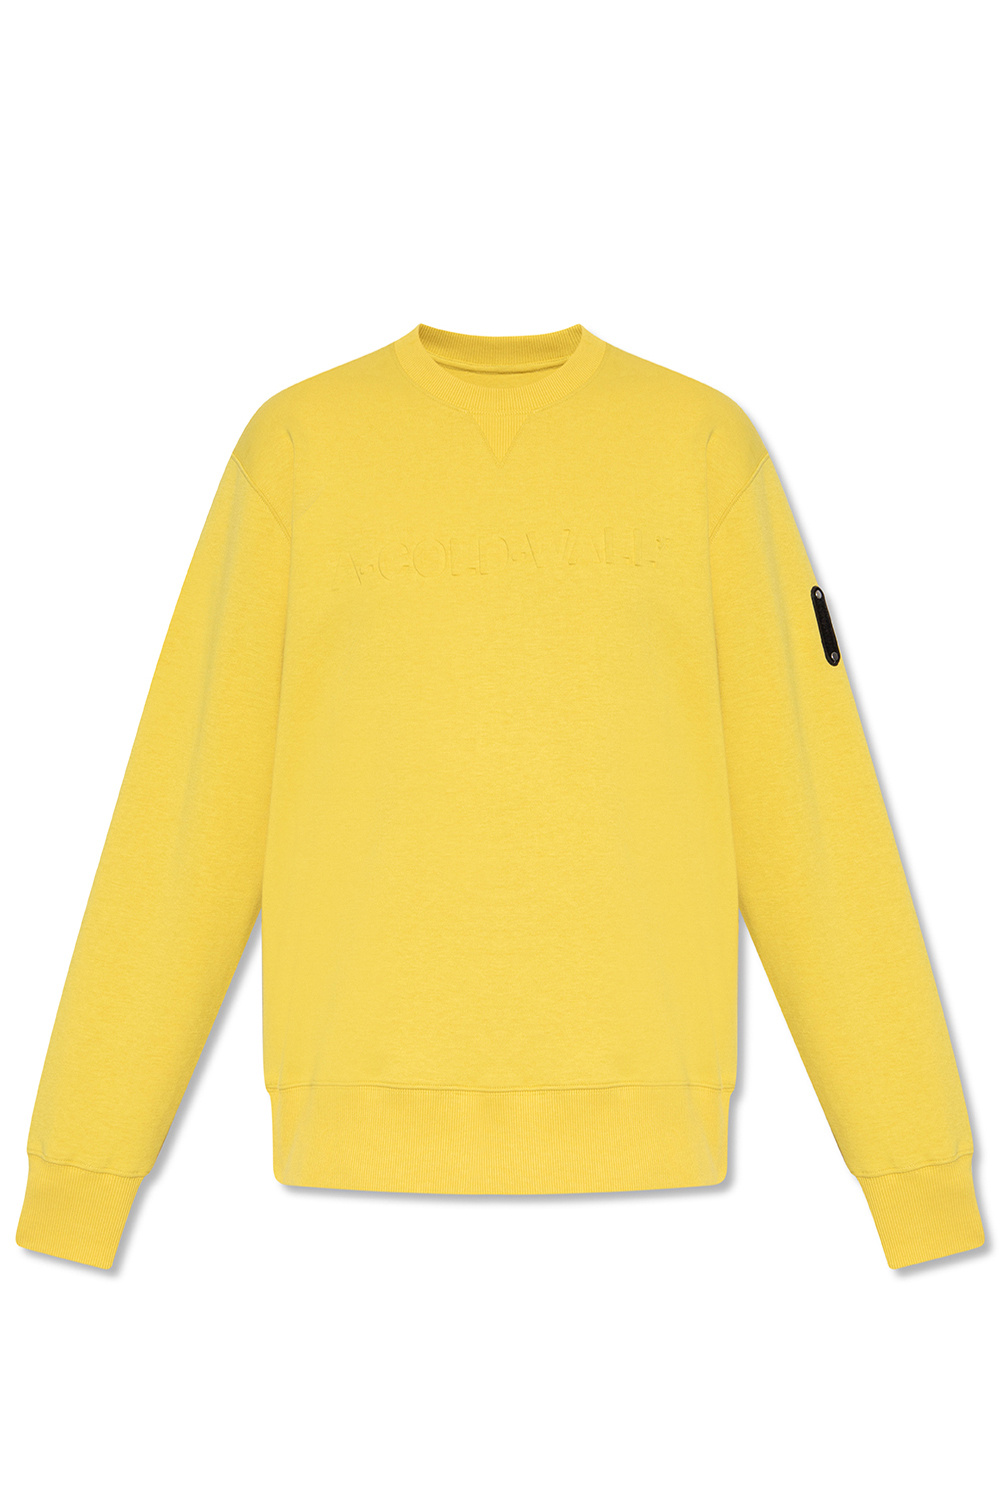 A-COLD-WALL* Nº21 logo-print relaxed-fit sweatshirt